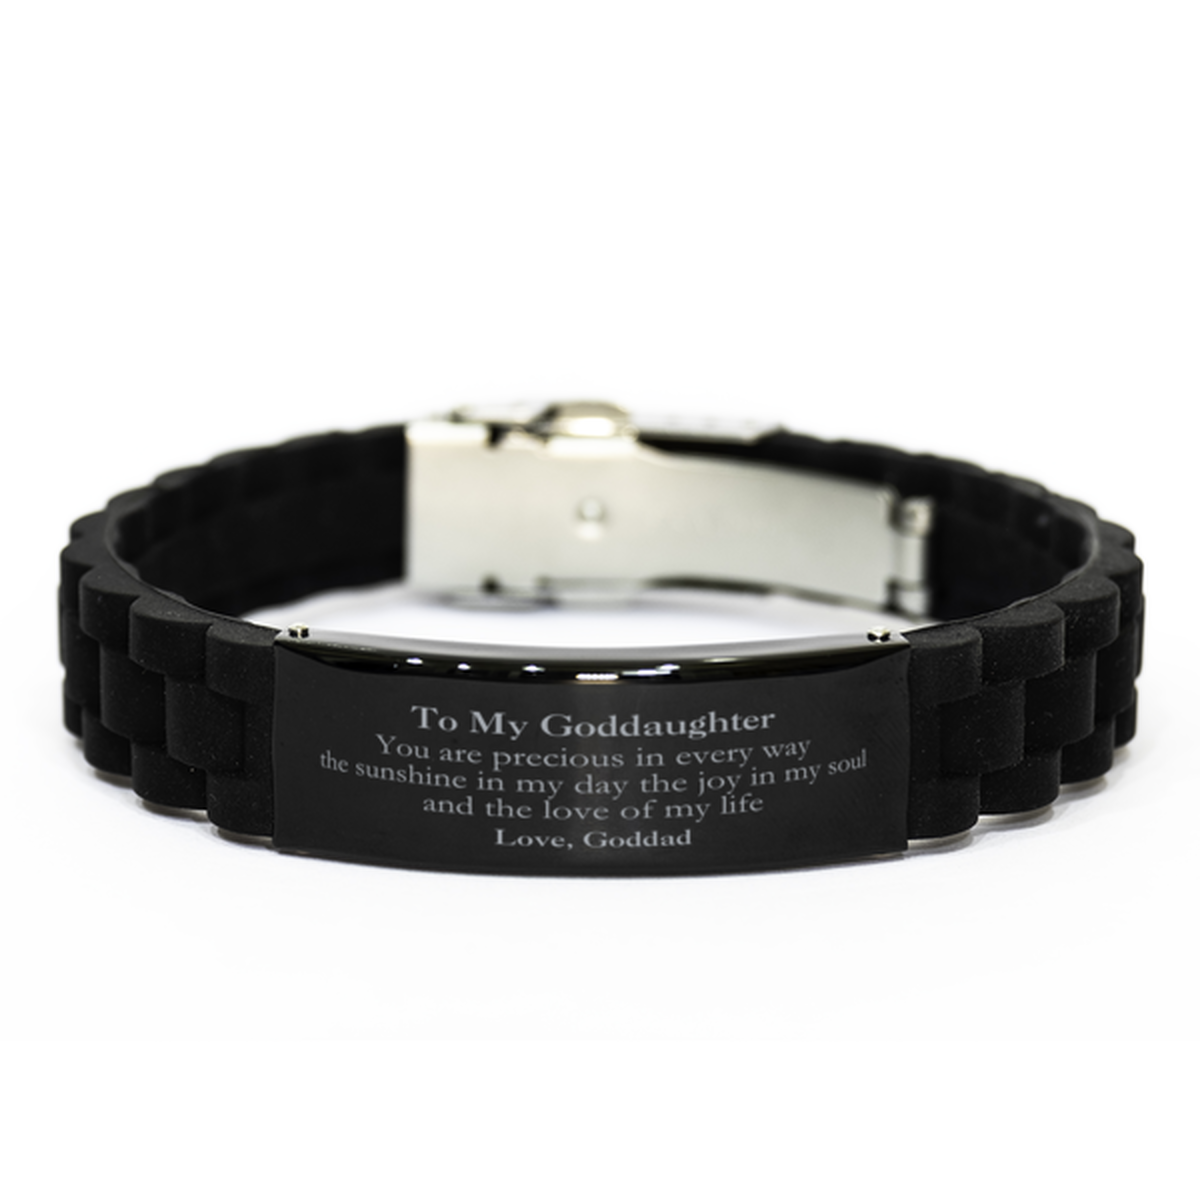 Graduation Gifts for Goddaughter Black Glidelock Clasp Bracelet Present from Goddad, Christmas Goddaughter Birthday Gifts Goddaughter You are precious in every way the sunshine in my day. Love, Goddad